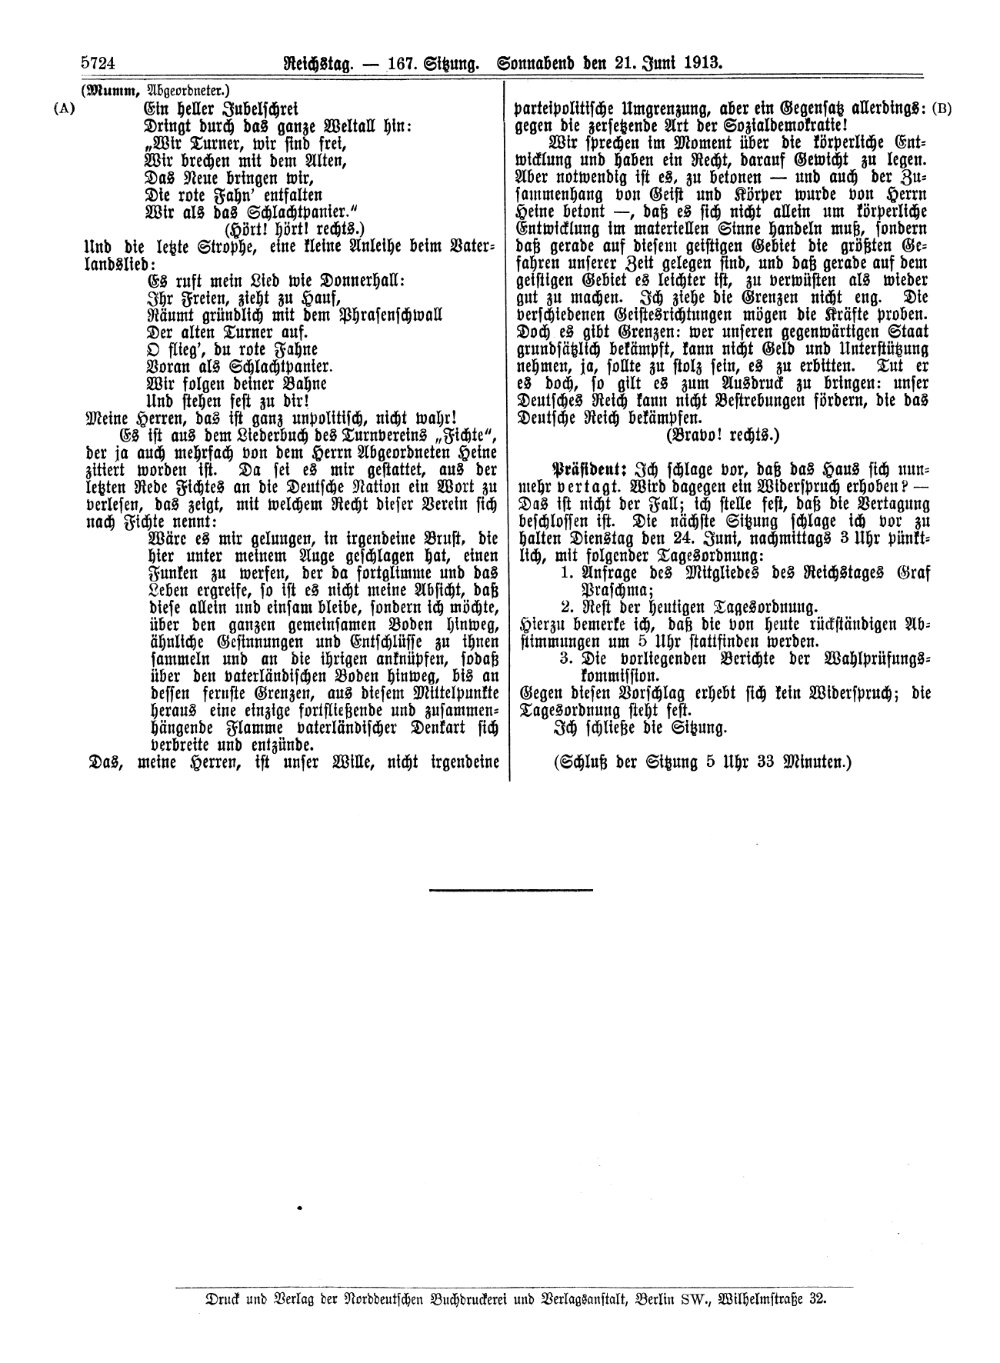 Scan of page 5724